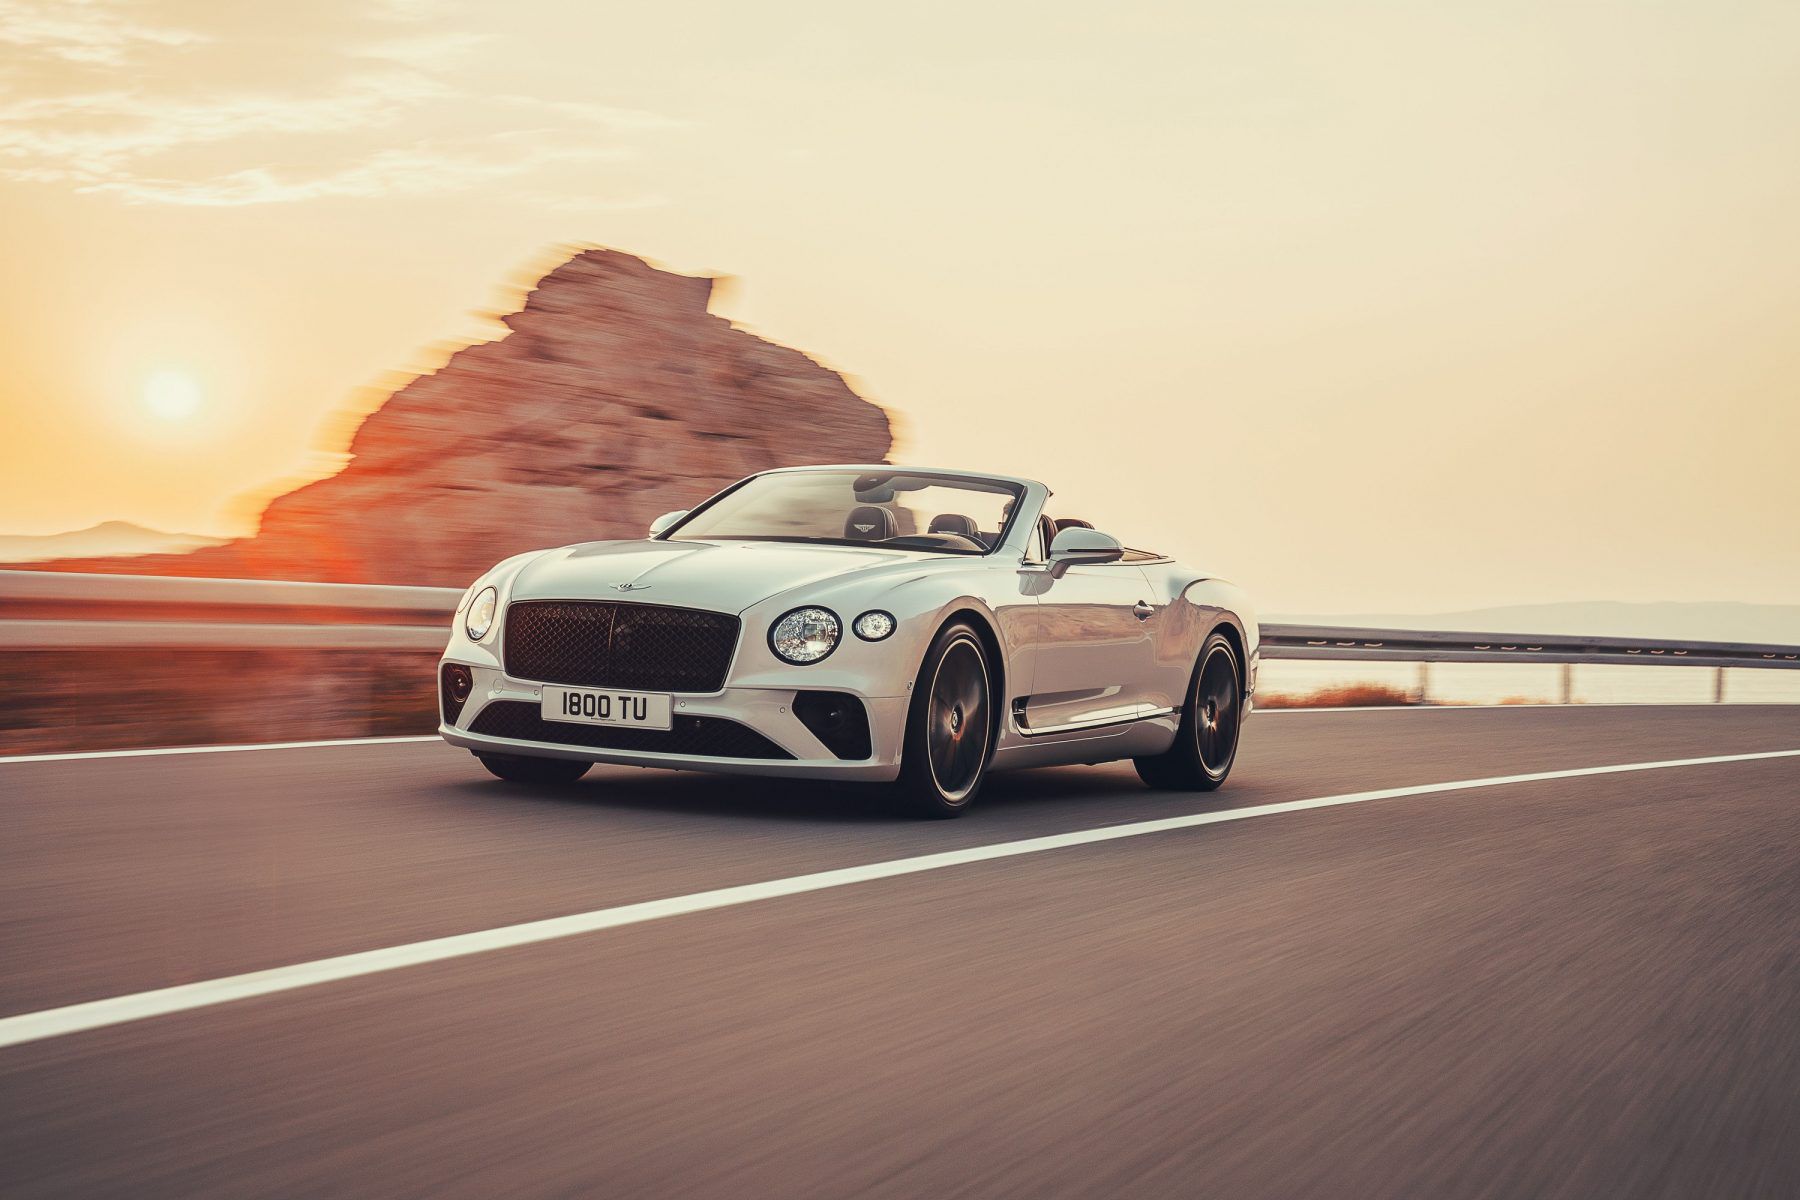 Bentley Continental GT Convertible driving on a road